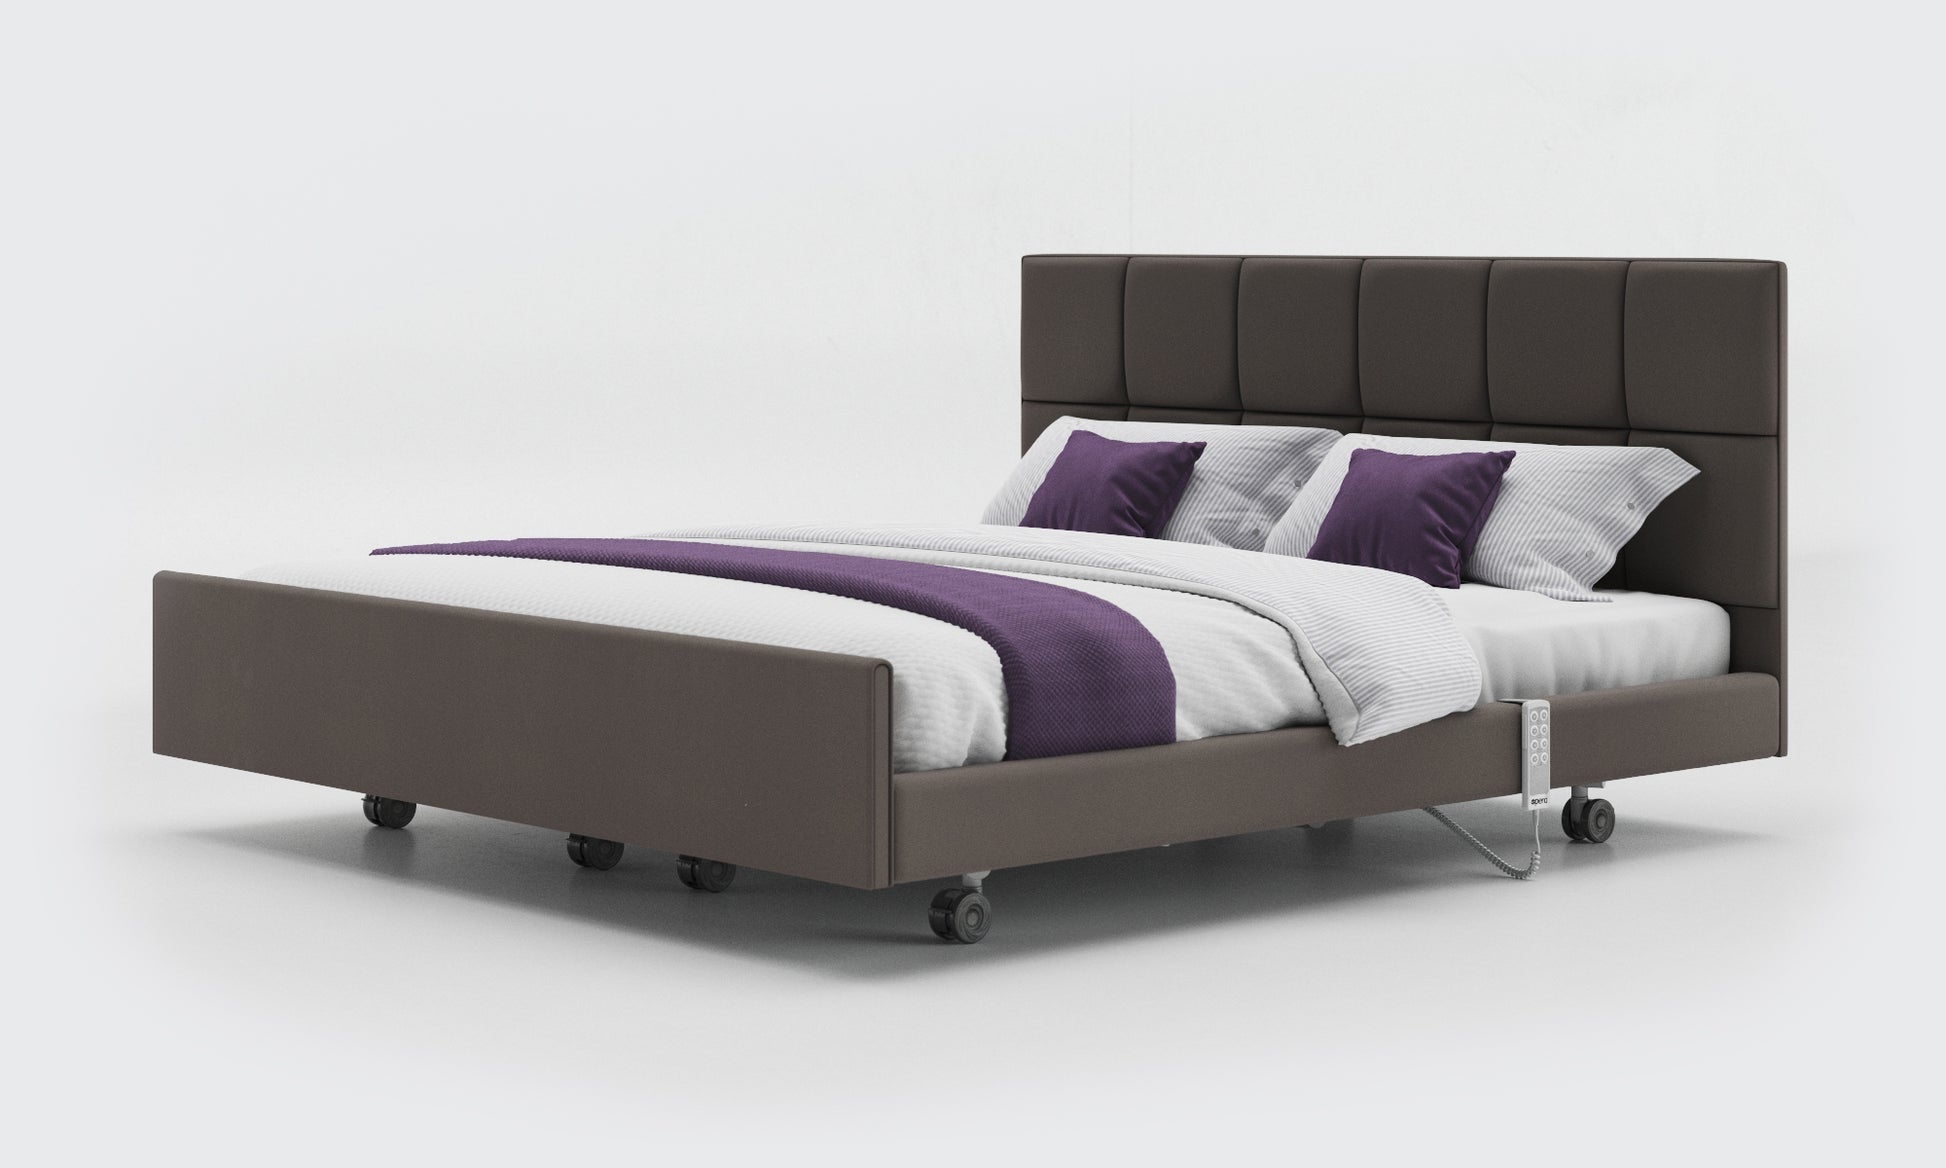 Meteor Leather Signature Comfort Dual Profiling Bed With an Opal Headboard